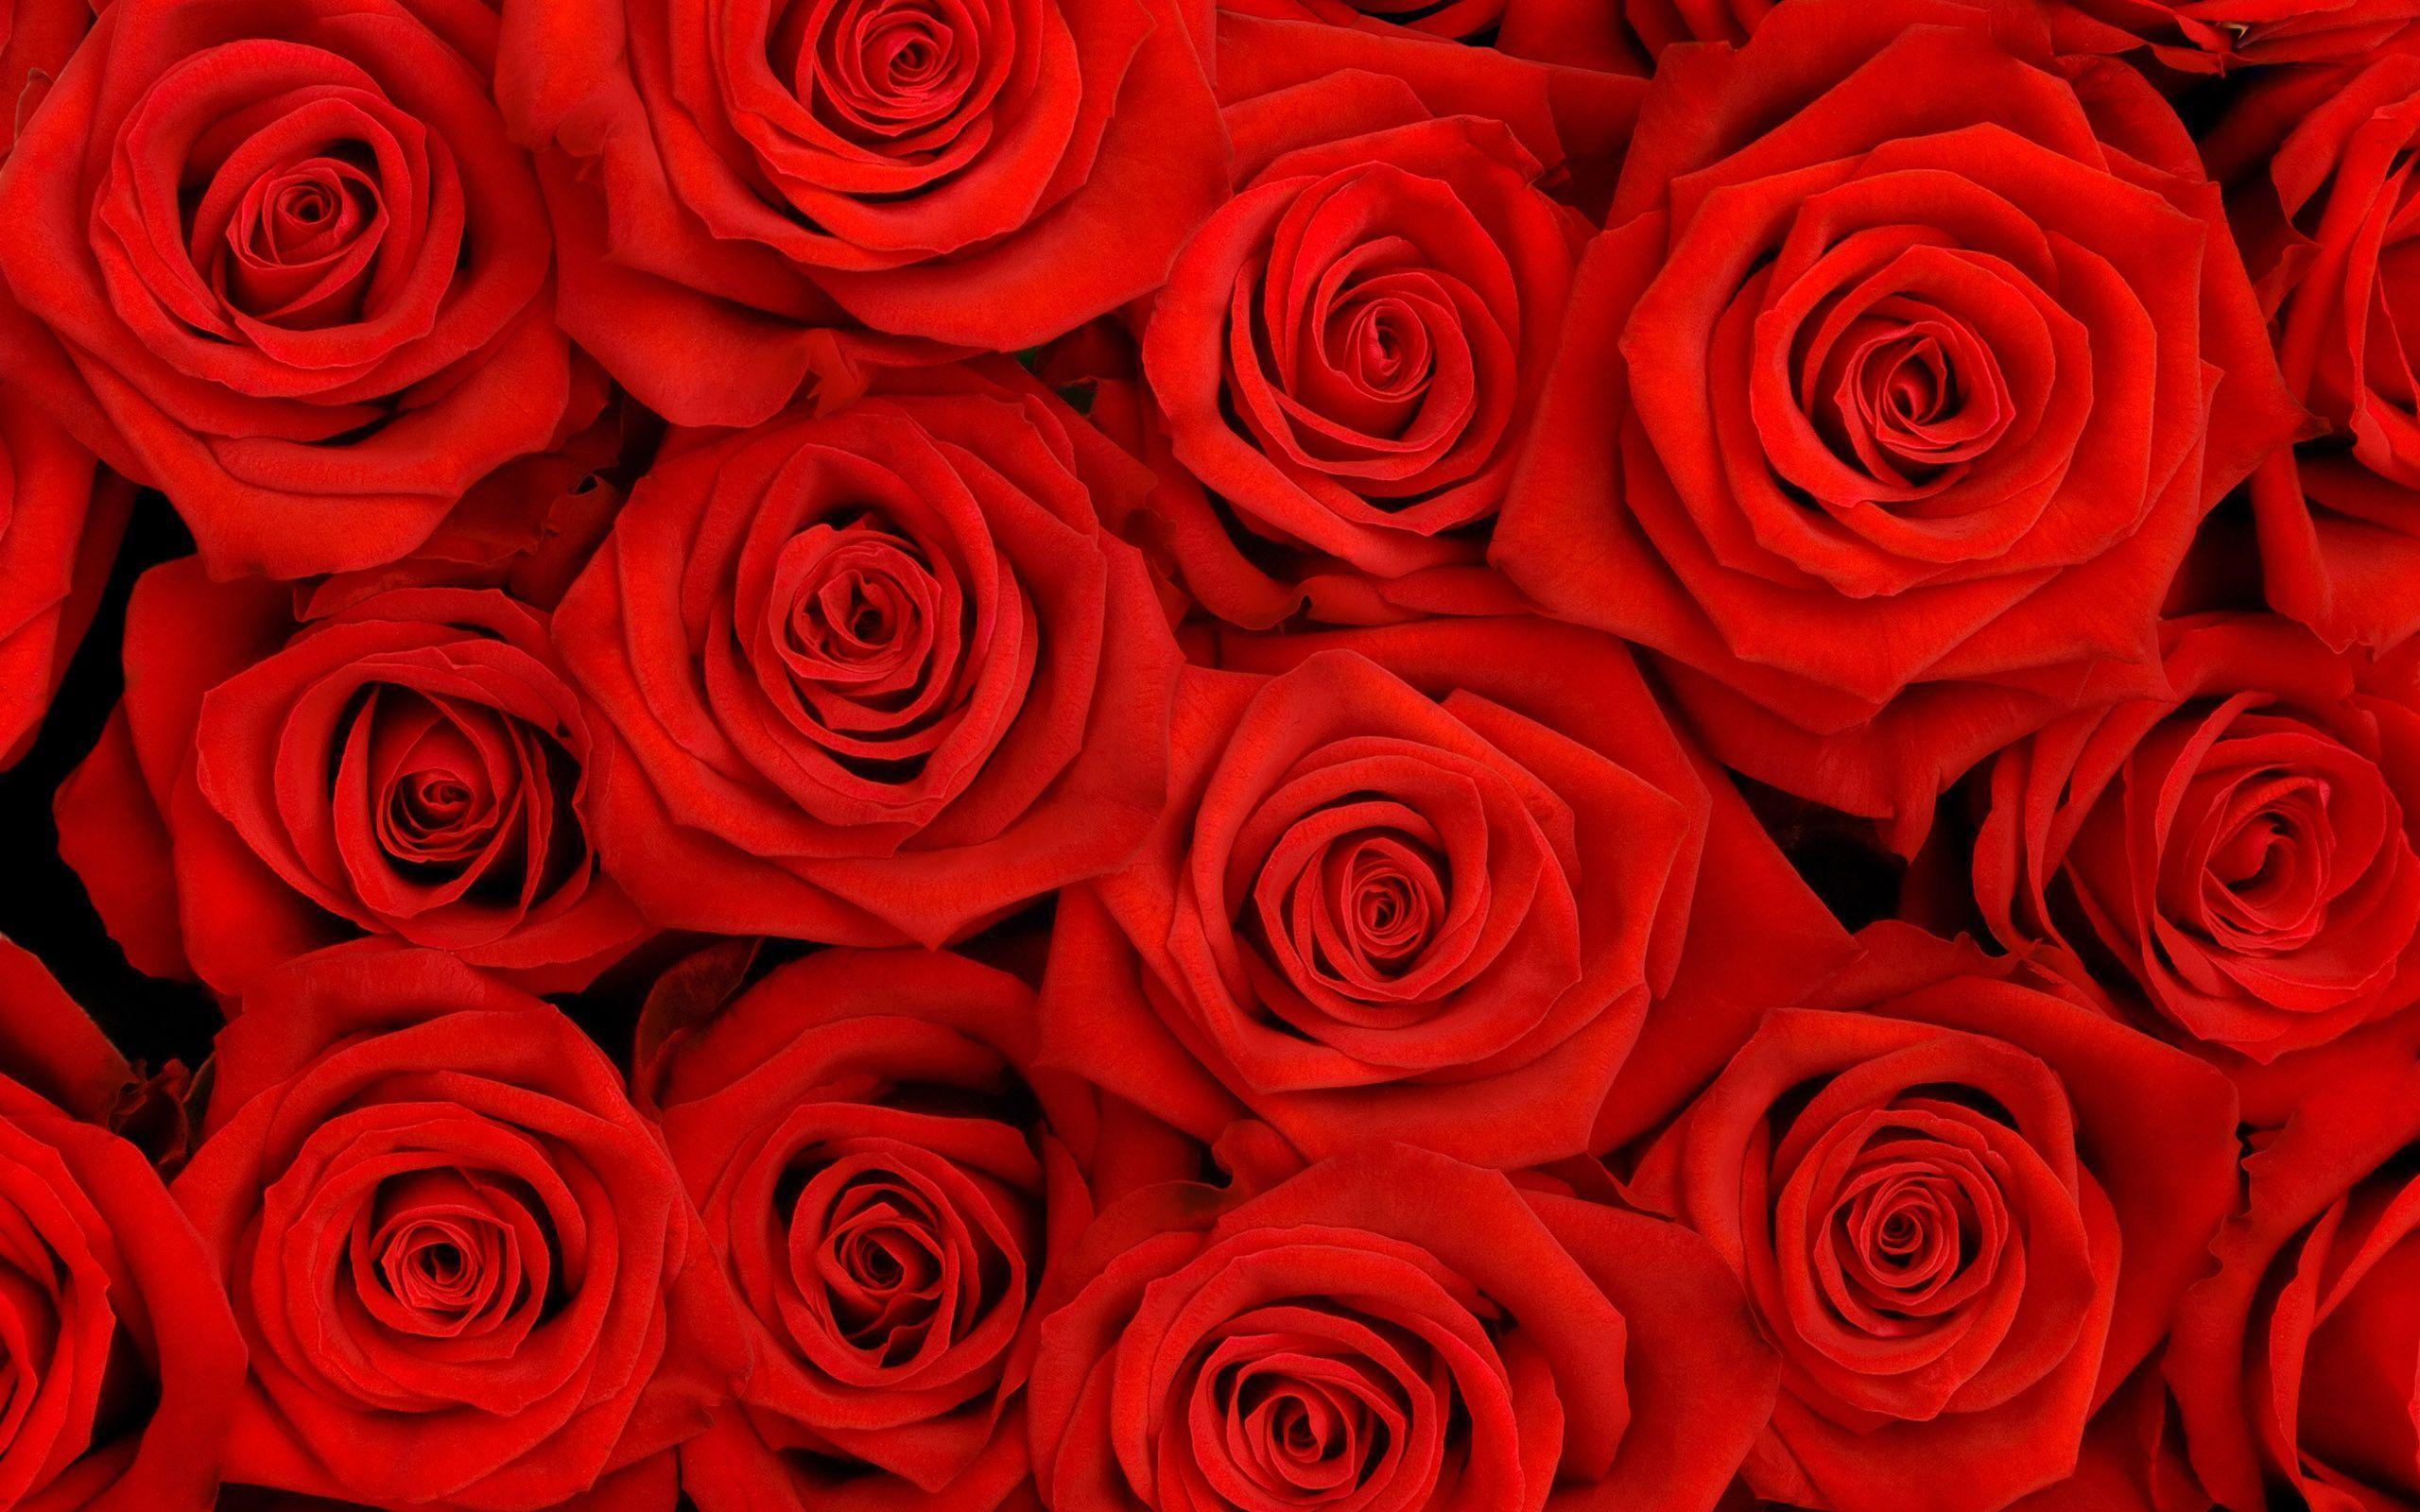 Free Desktop Background Roses Picture HD Image Red Rose For Mobile